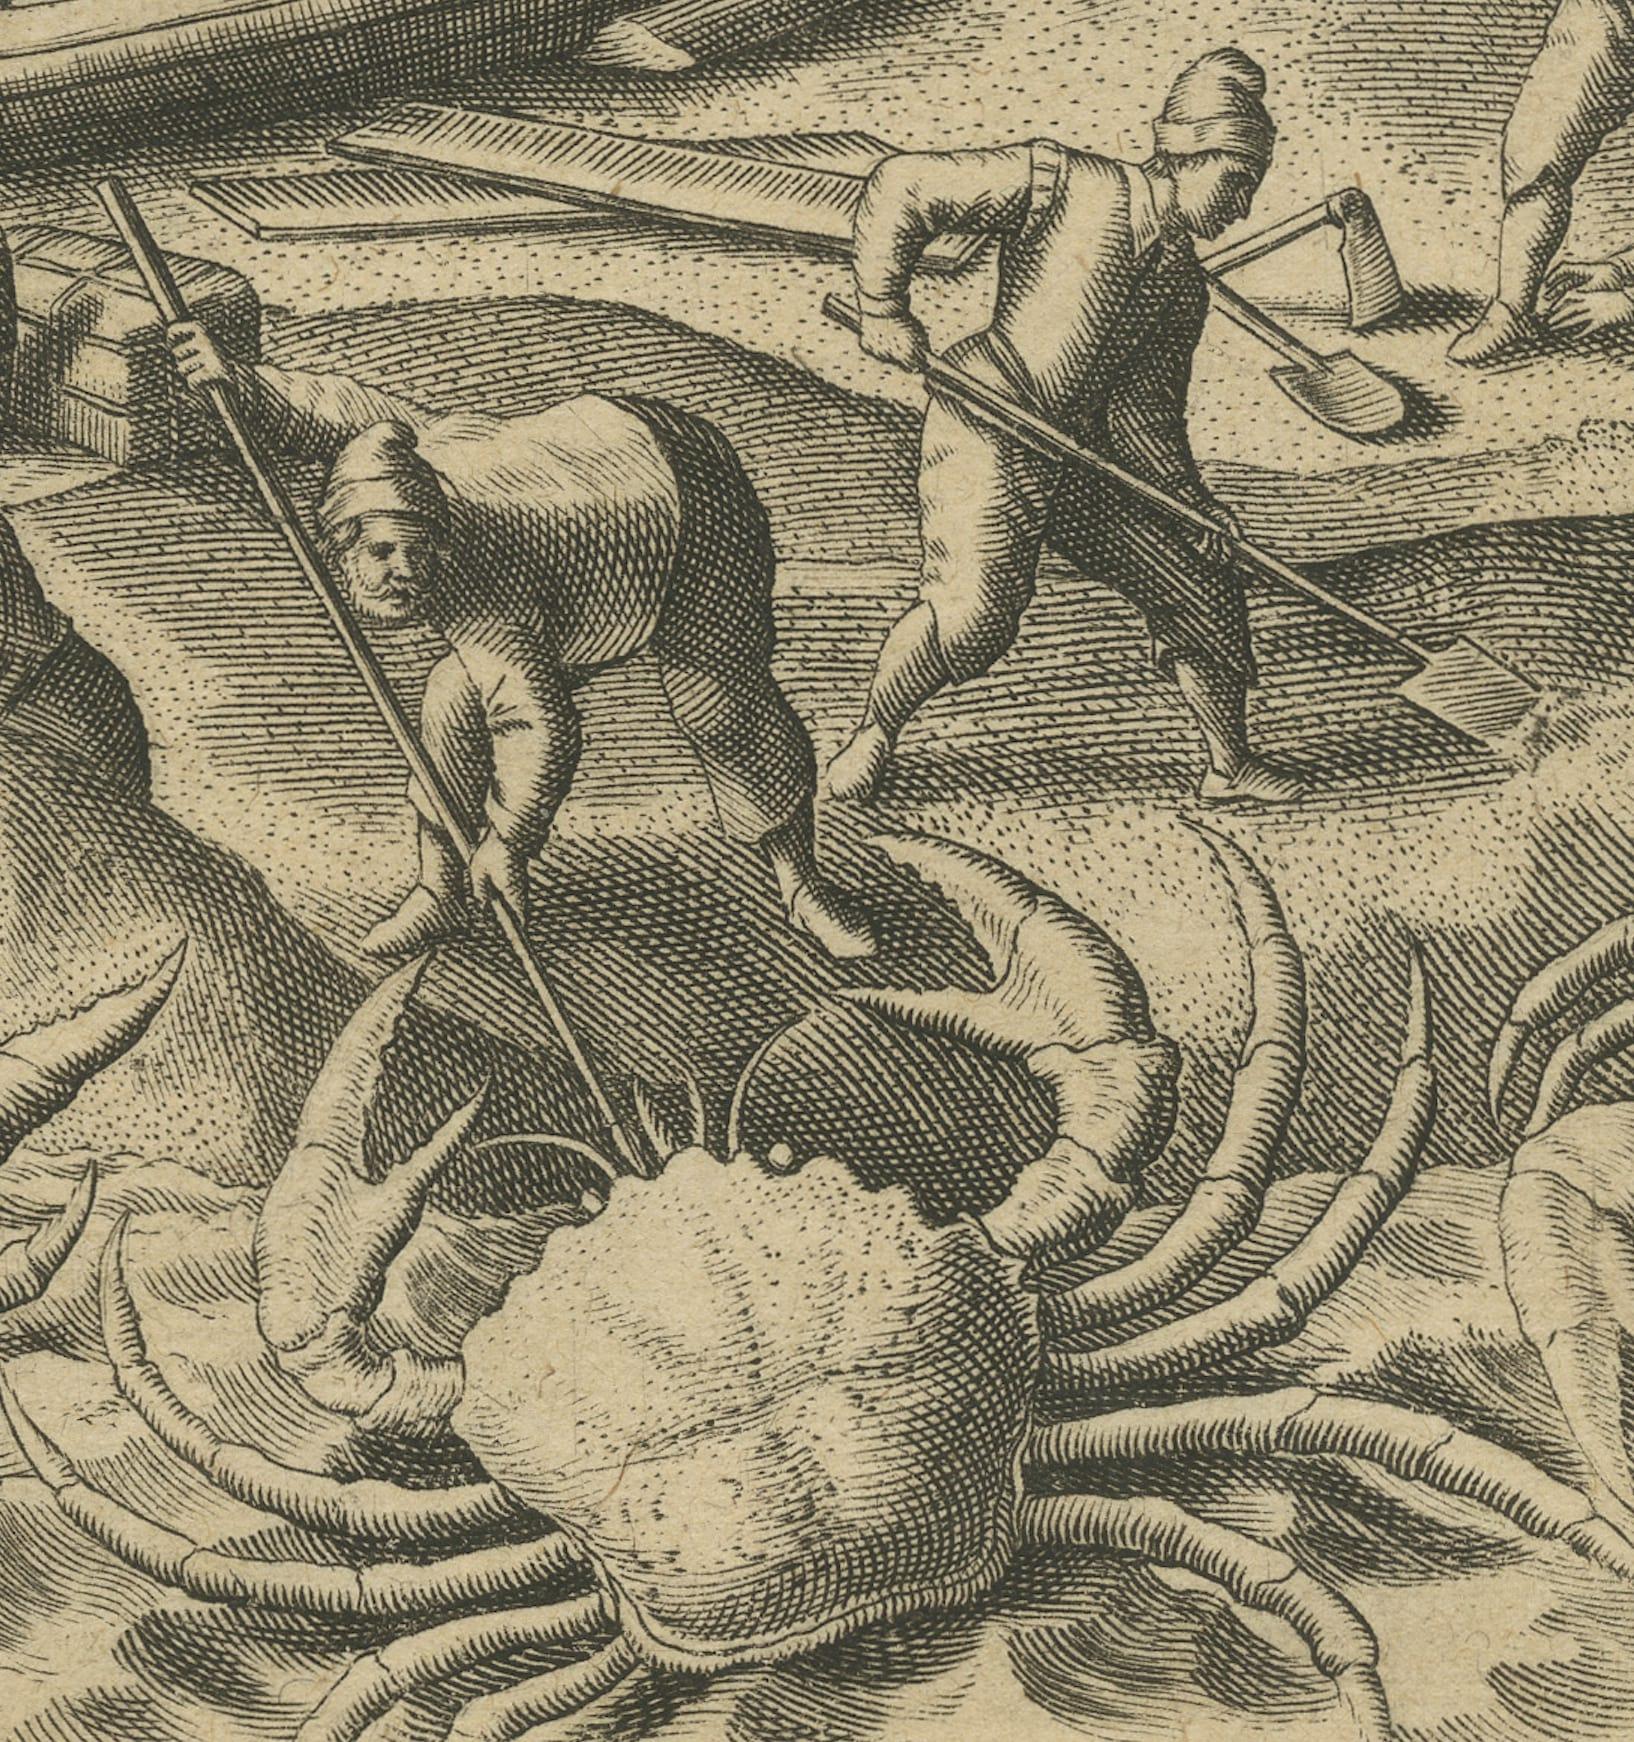 Engraved Engraving of a Nautical Battle of Dutch in the Seychelles with Giant Crabs, 1601 For Sale